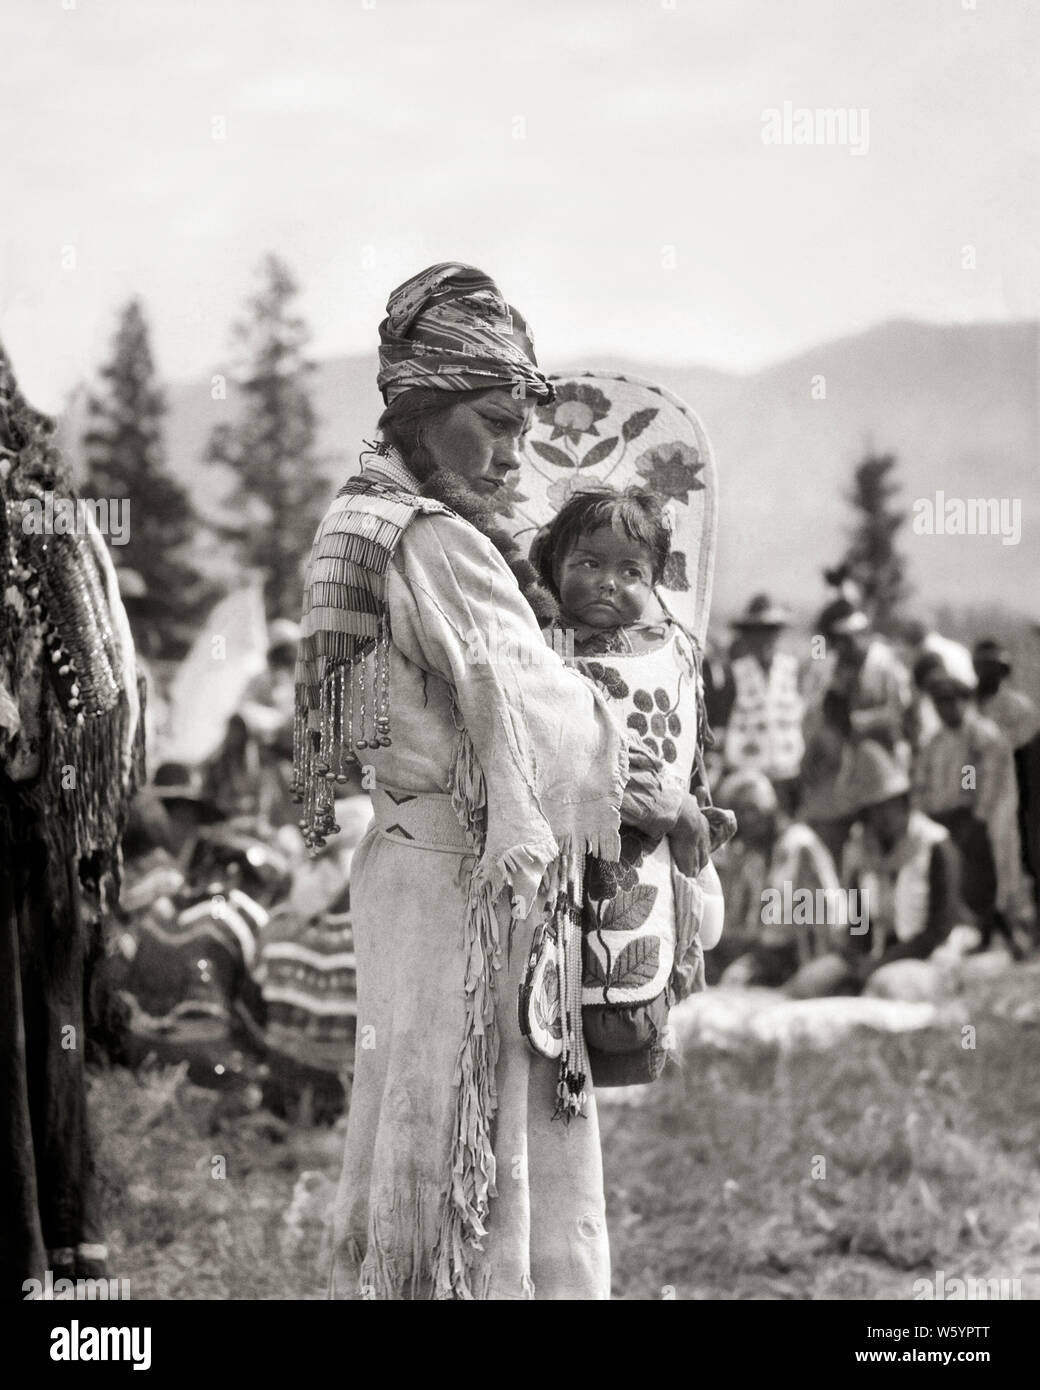 1920s 1930s NATIVE AMERICAN STONEY SIOUX INDIAN WOMAN MOTHER IN BEADED BUCKSKIN DRESS HOLDING BABY BOY GIRL IN PAPOOSE CANADA  - i59 HAR001 HARS FEMALES RURAL HOME LIFE COPY SPACE FULL-LENGTH HALF-LENGTH LADIES PERSONS TRADITIONAL INDIANS B&W NORTH AMERICA NORTH AMERICAN BUCKSKIN REAR VIEW IN CONCEPTUAL PAPOOSE NATIVE AMERICAN BABY BOY STONEY SIOUX BACK VIEW DEERSKIN FRINGED JUVENILES MID-ADULT MID-ADULT WOMAN MOMS NATIVE AMERICANS BABY GIRL BEADED BLACK AND WHITE CHILD CARRIER CRADLE BOARD HAR001 INDIGENOUS OLD FASHIONED Stock Photo